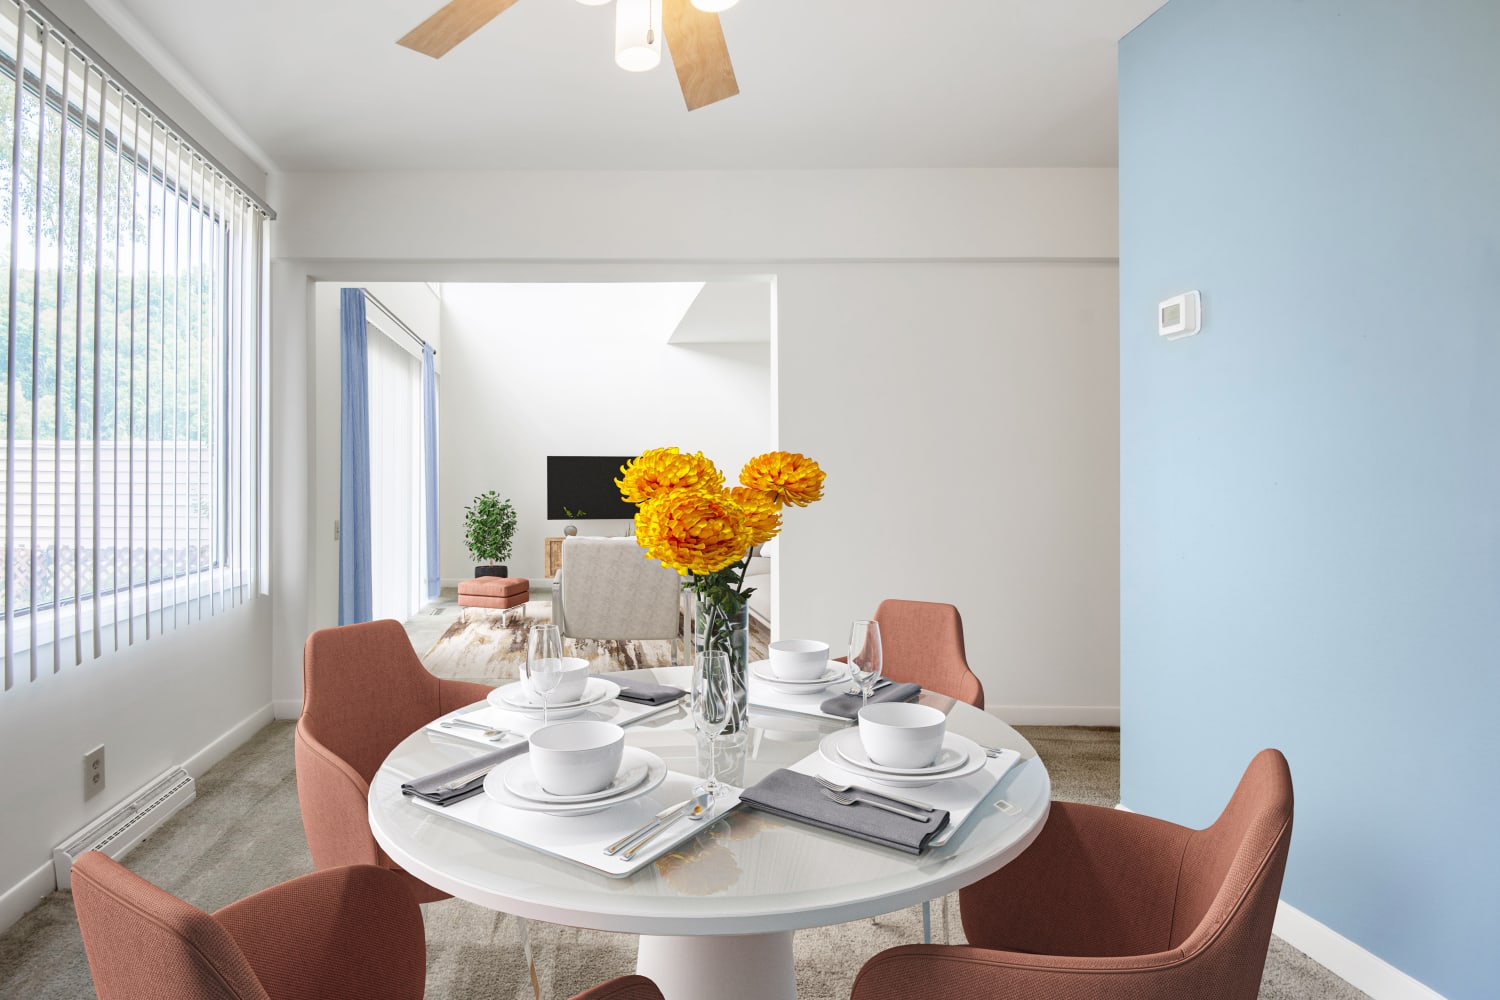 Beautiful dining area with a ceiling fan at Emerald Springs Apartments in Painted Post, New York